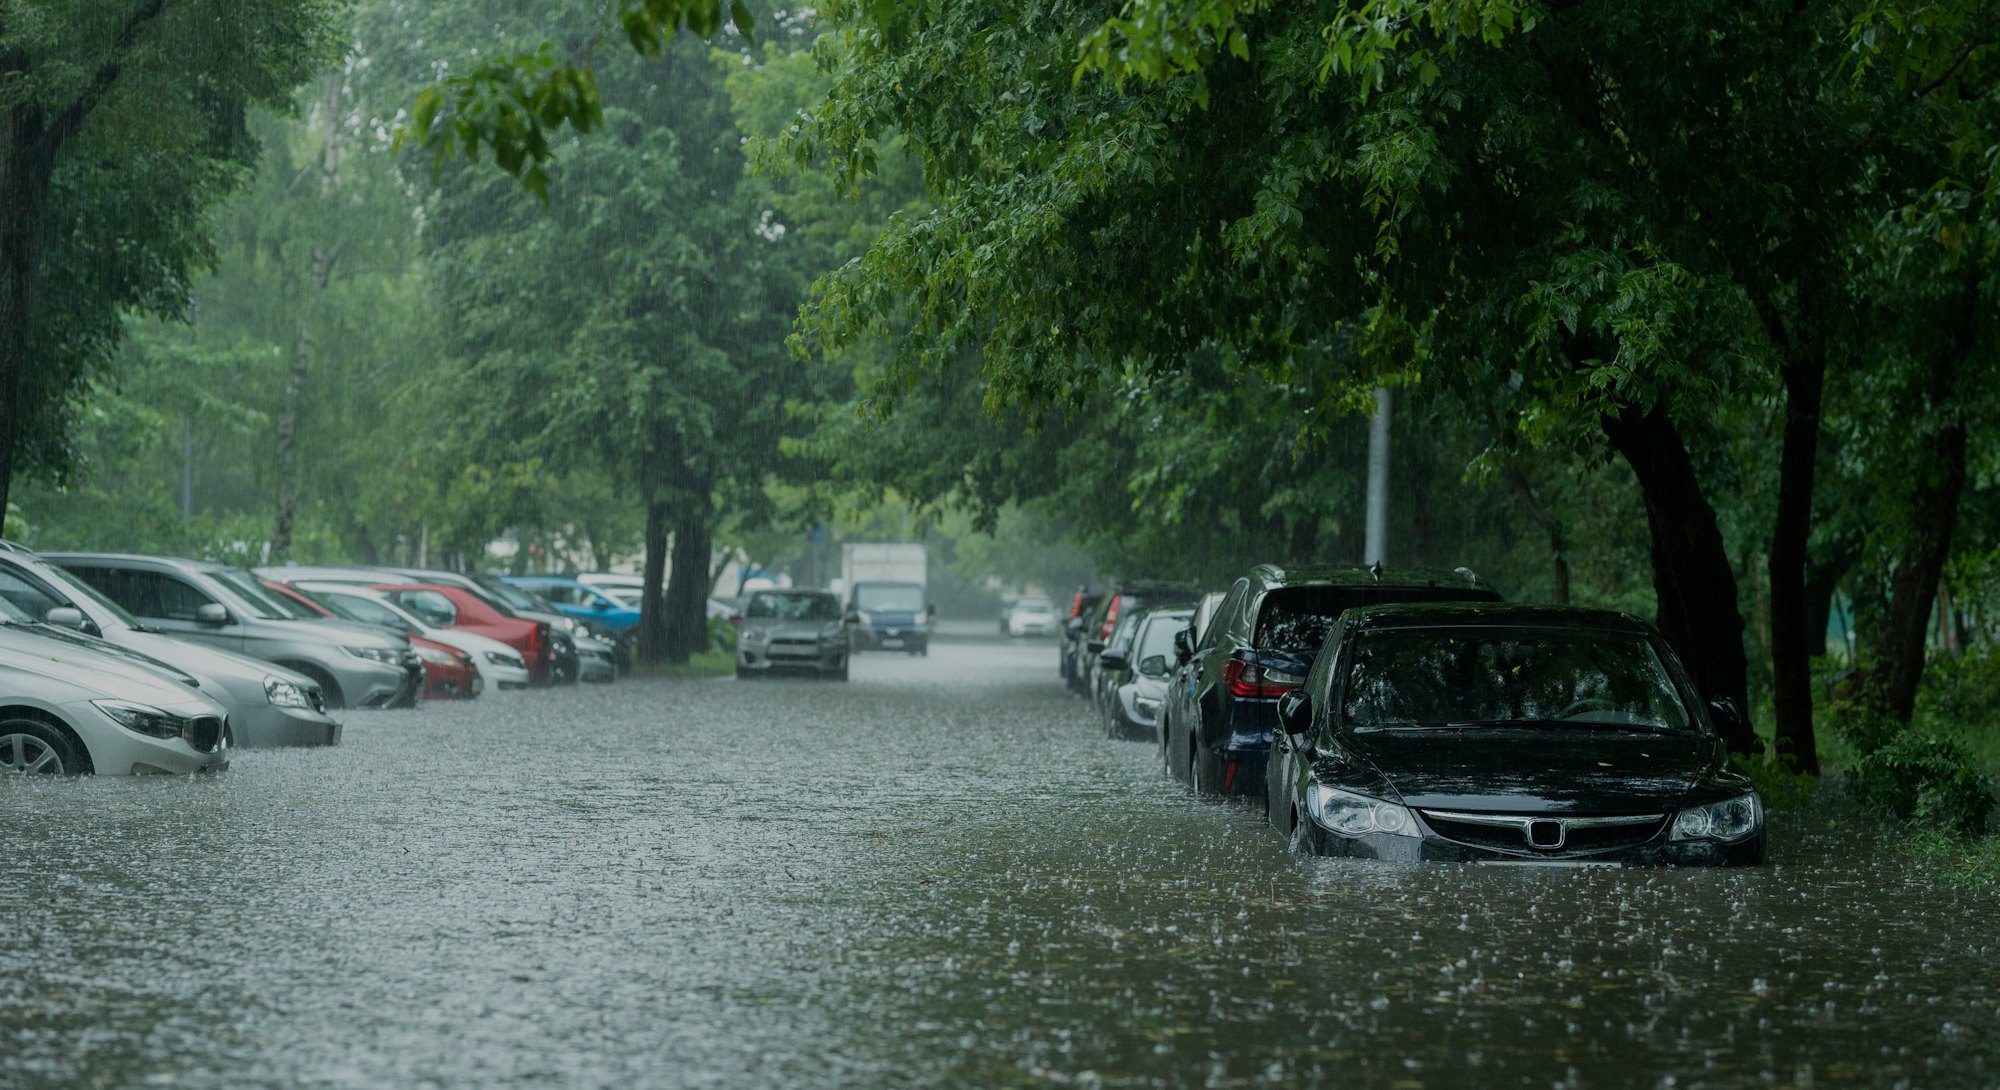 Flooded cars on the street of the city. Street after heavy rain. Water could enter the engine, trans...